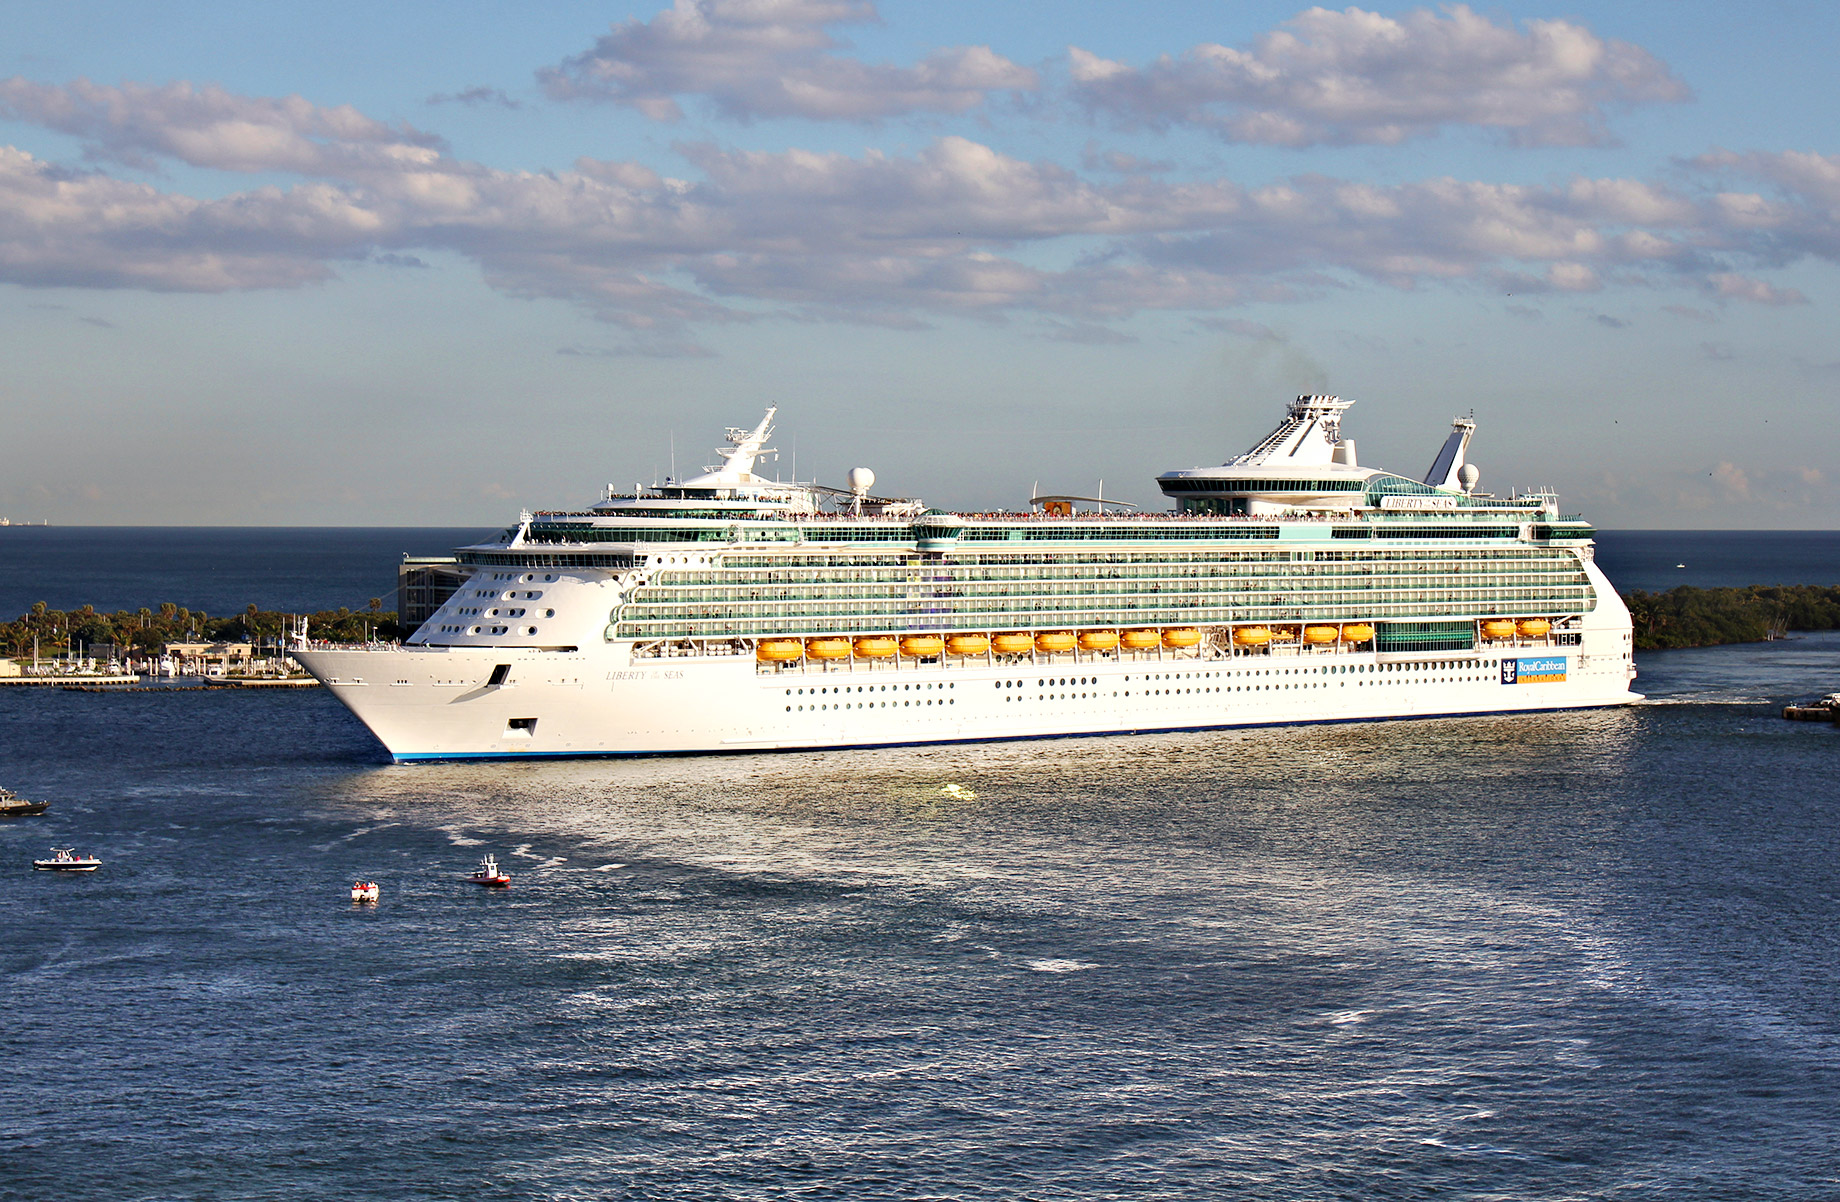 Oasis Of The Seas Cruise Line - Port Everglades - Fort Lauderdale, Florida, USA